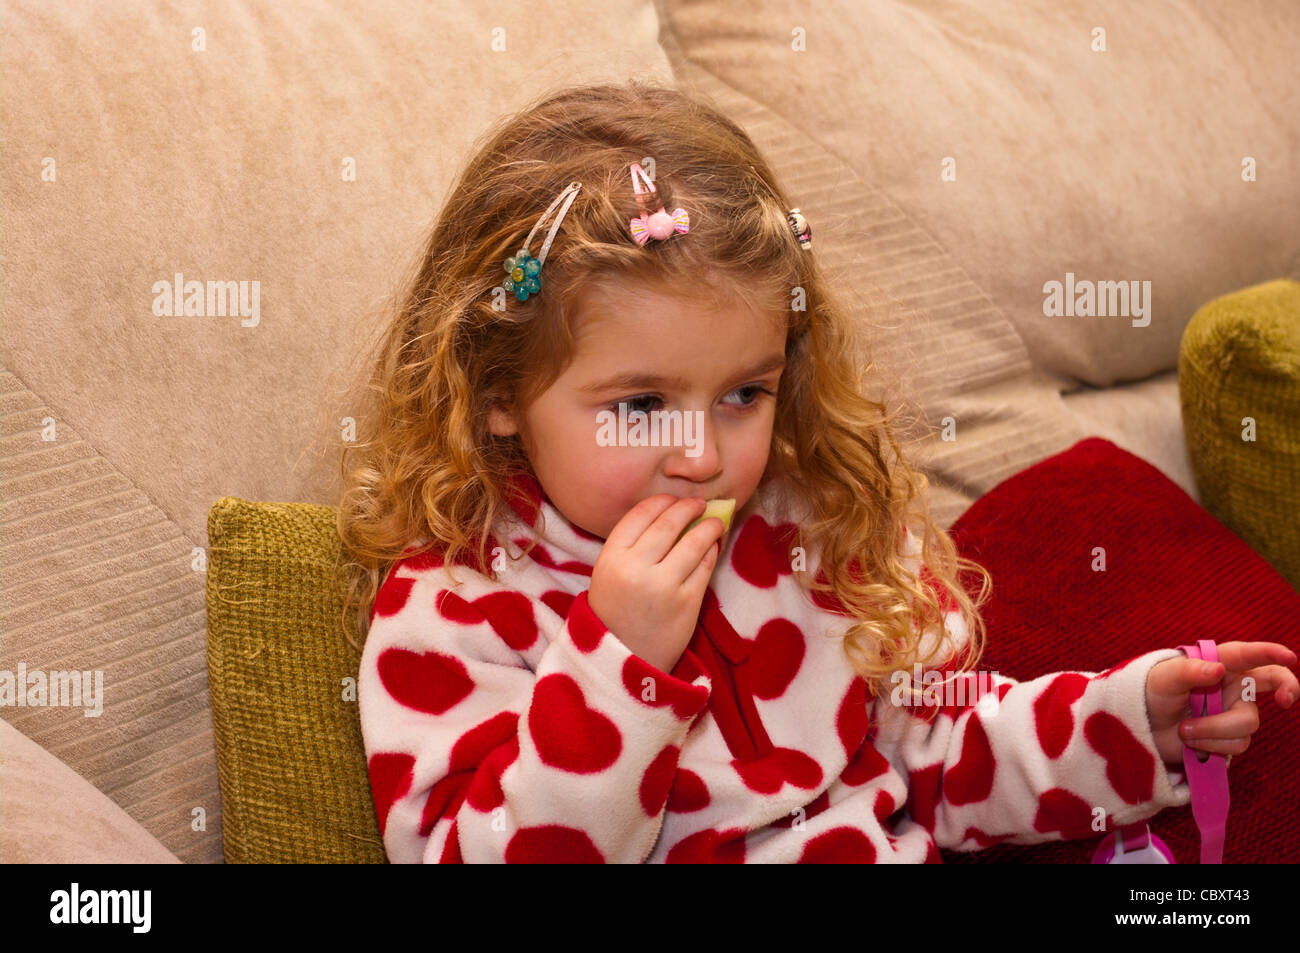 3 Year Old Child Girl Infant Toddler Eating A Slice Of Apple Fruit Stock Photo